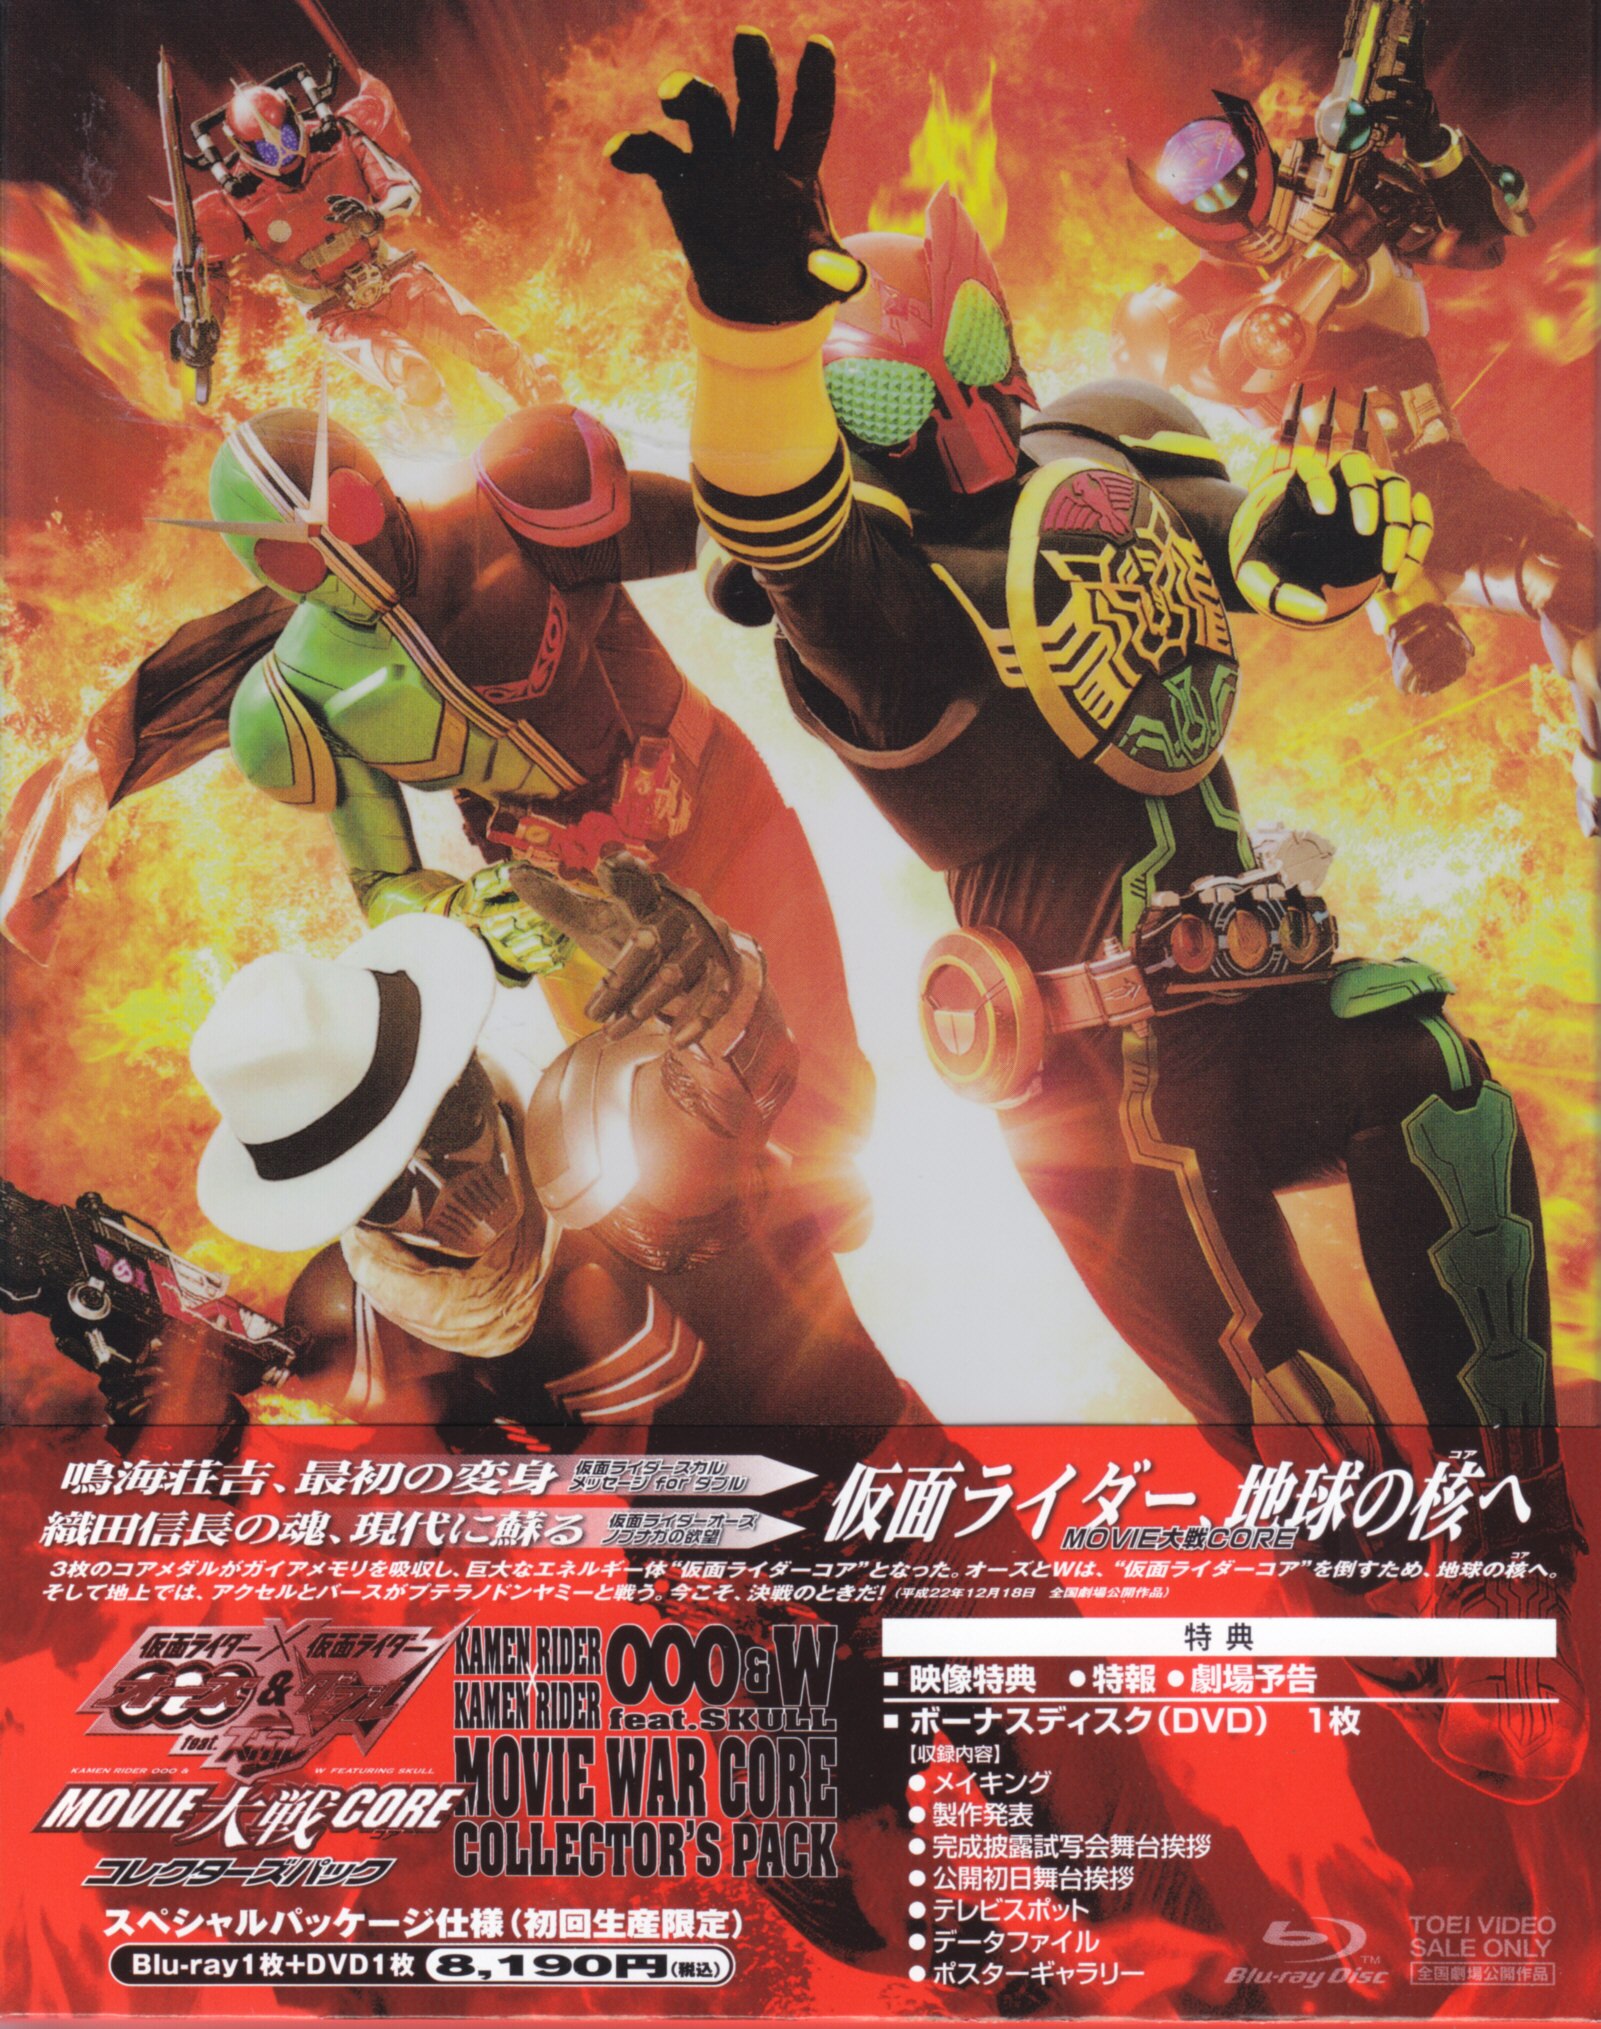 Tokusatsu Blu-Ray [Collector's Pack] Kamen Rider OOO and W feat